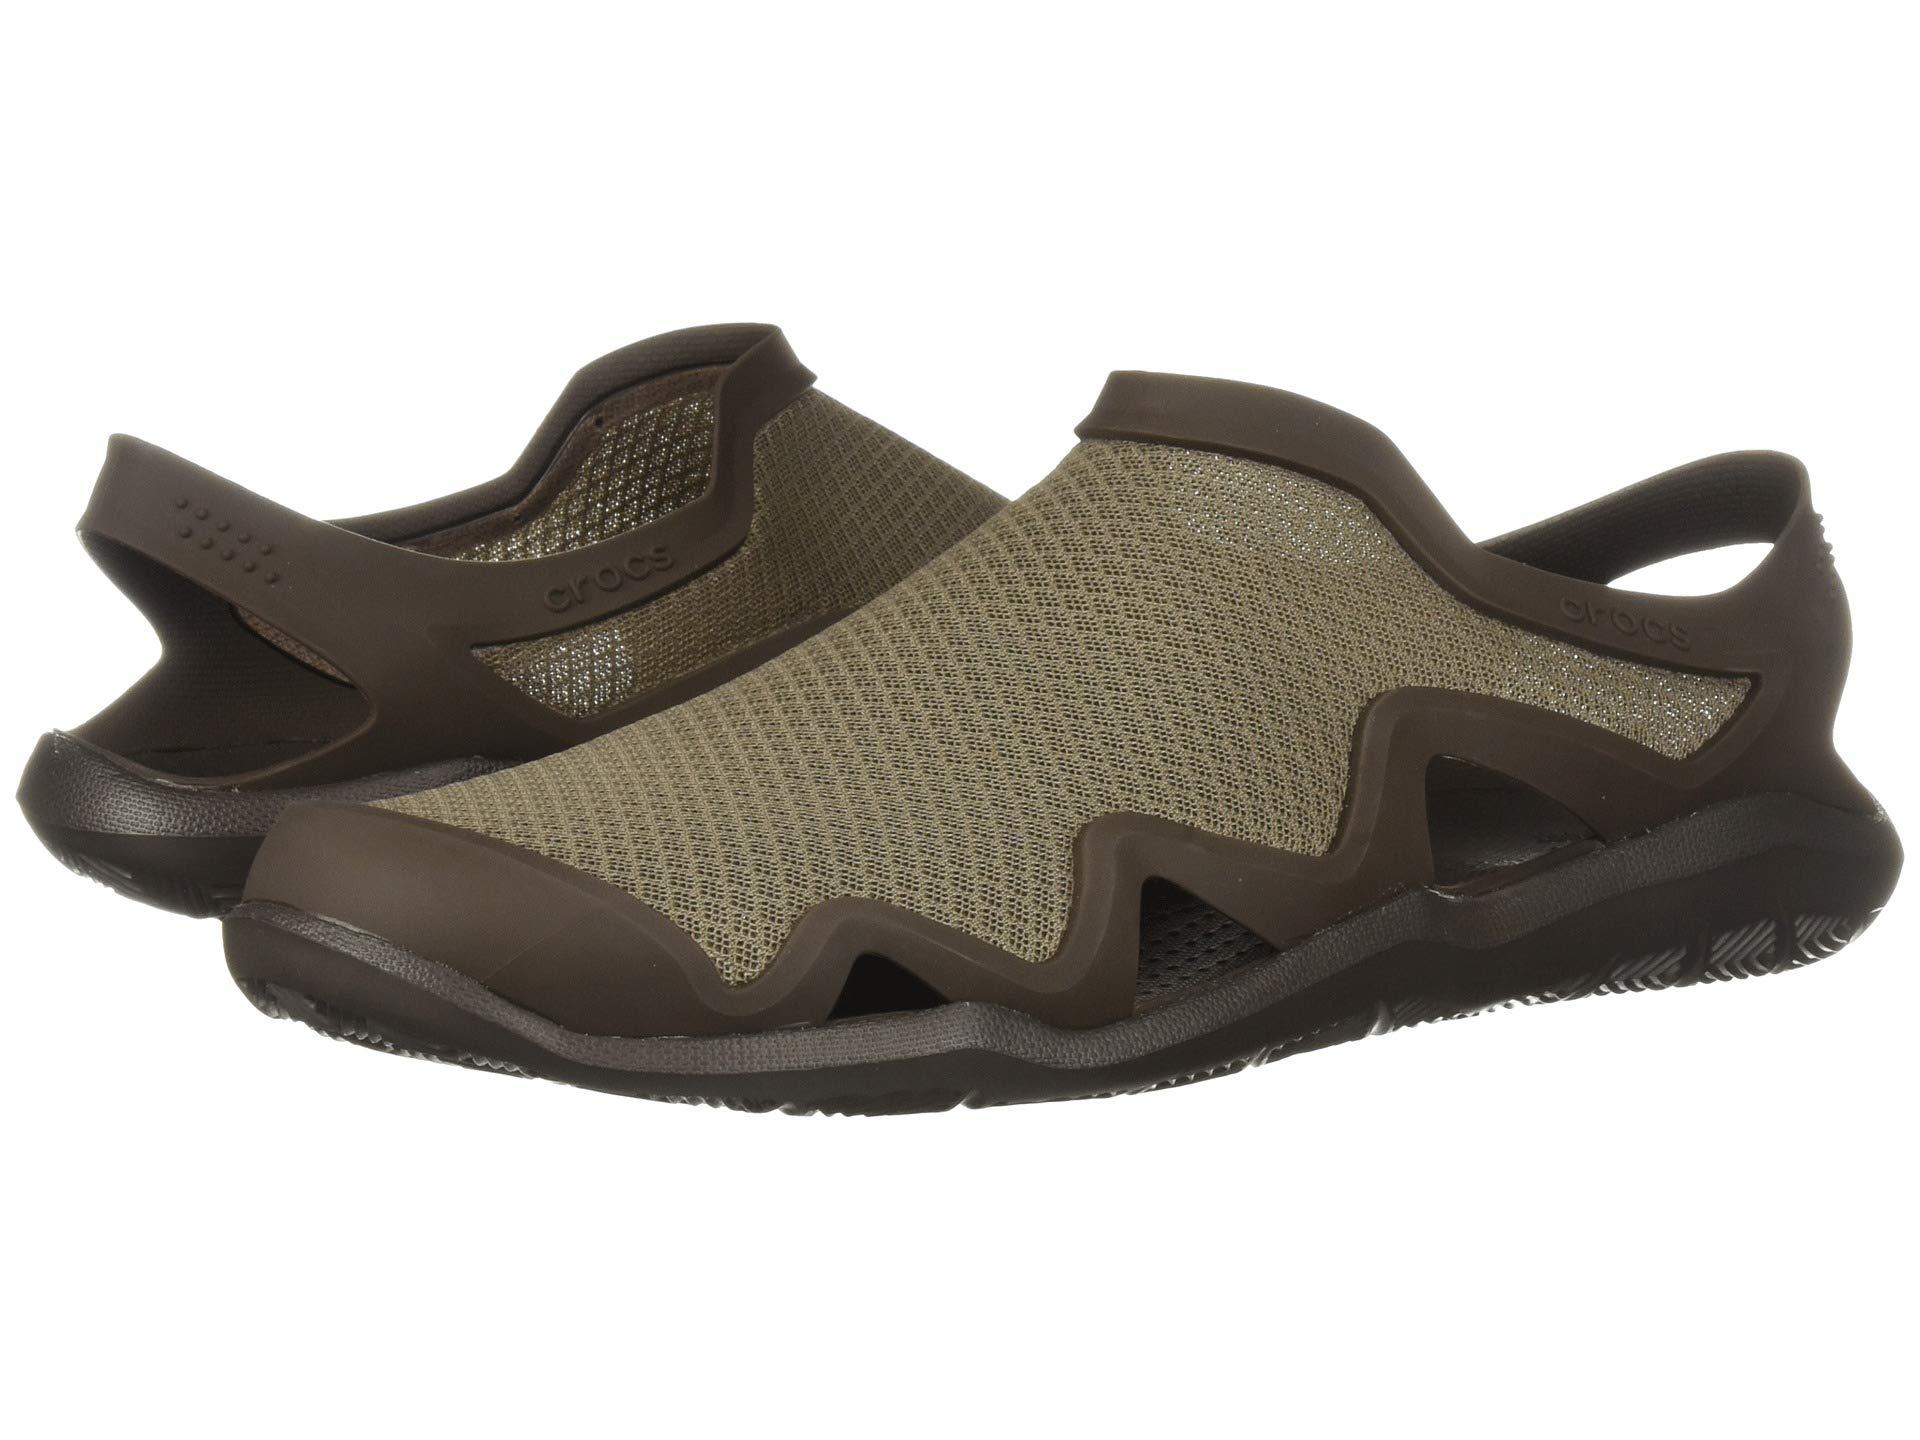 swiftwater mesh wave textured sandal